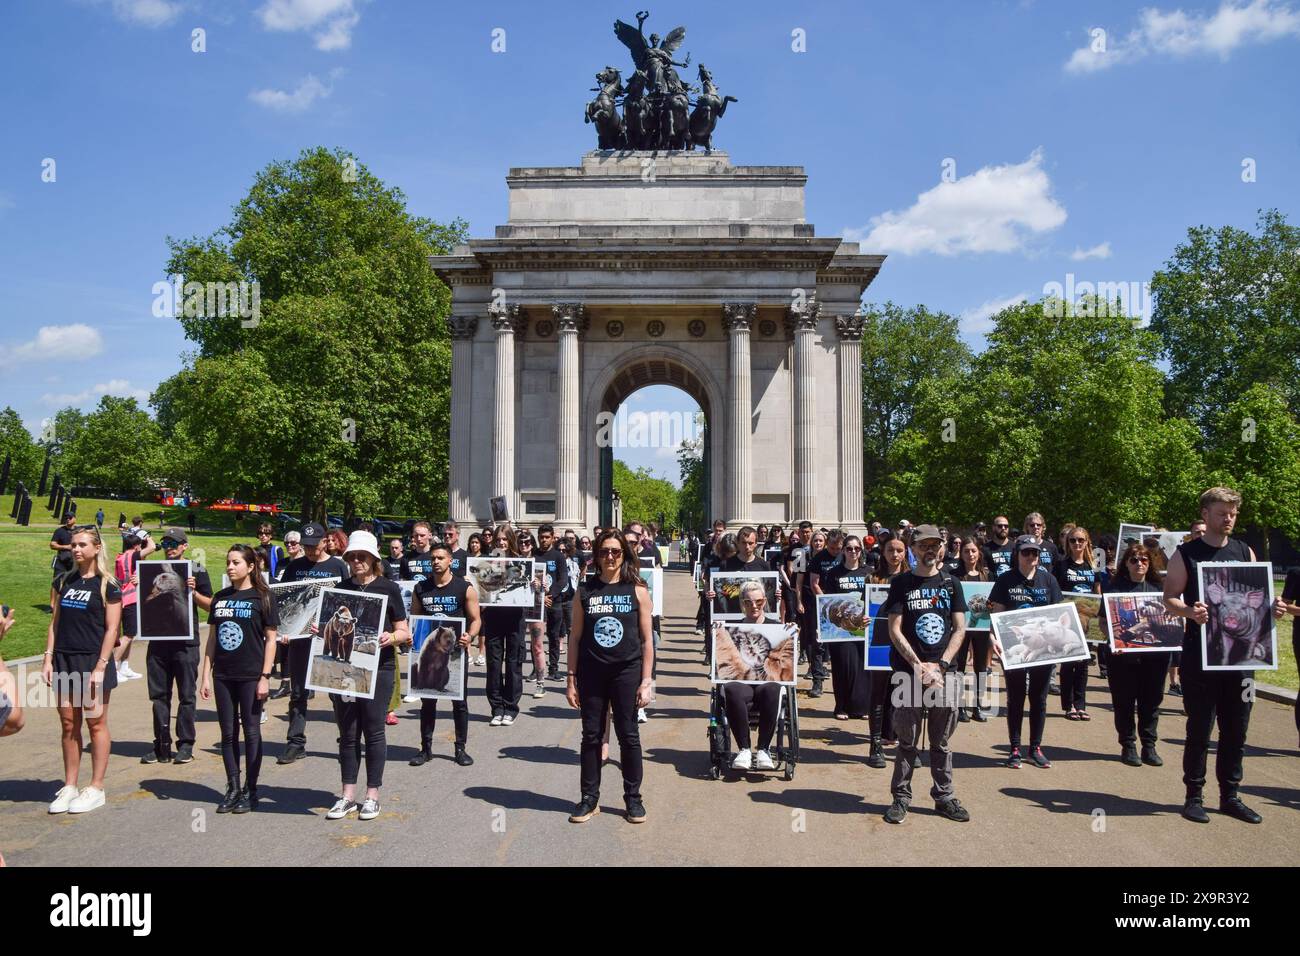 London, UK. 2nd June 2024. Animal rights actvists gather with pictures of animals next to the Wellington Arch at Hyde Park Corner for the National Animal Rights Day memorial. The annual event, taking place in numerous countries around the world, honours the billions of animals killed, abused and exploited by humans, and celebrates progress towards freedom for all species. Credit: Vuk Valcic/Alamy Live News Stock Photo